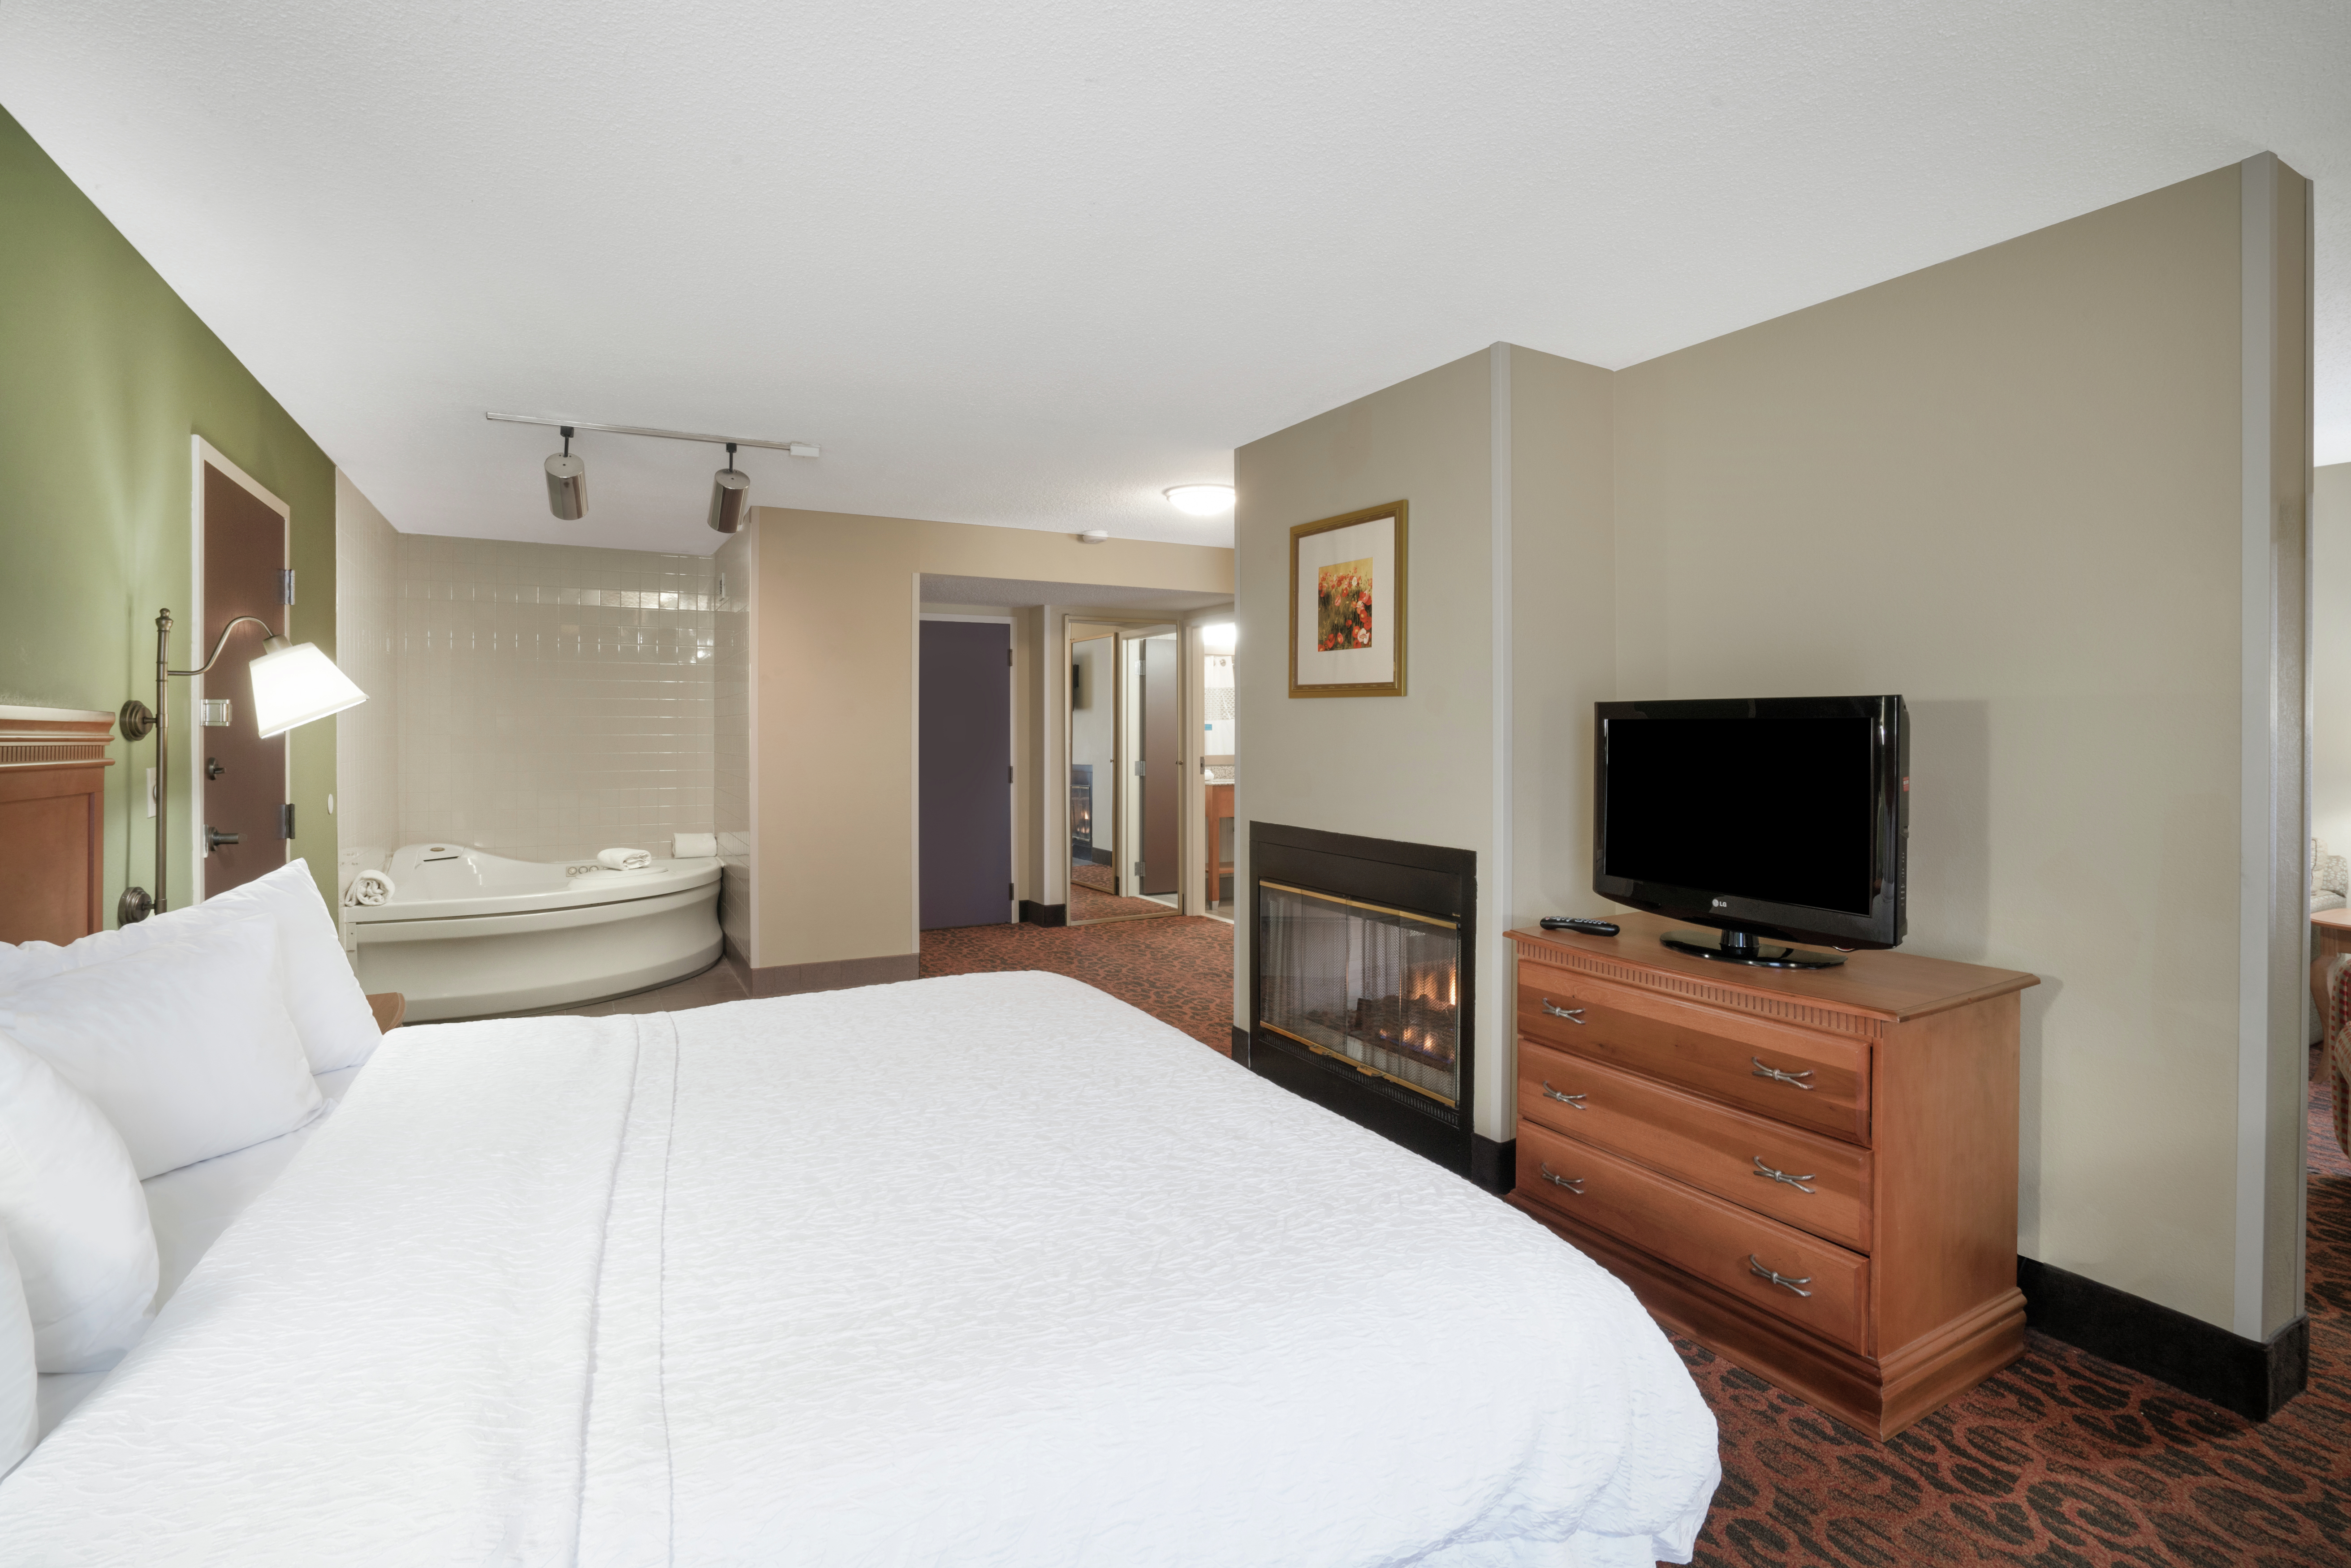 King Bed, TV, Fireplace, and Jacuzzi in Studio Suite